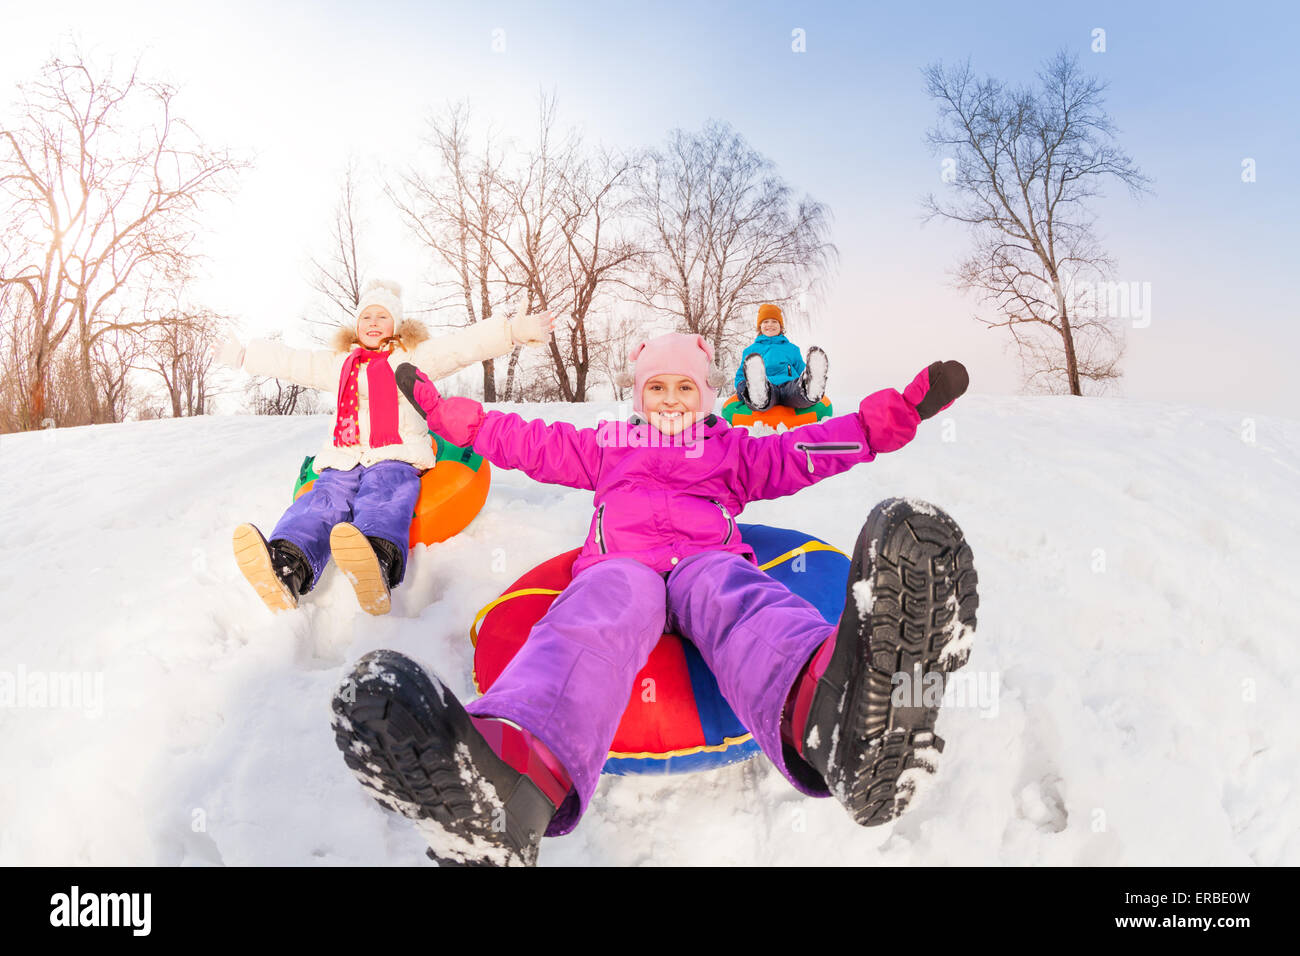 Girl and her friends sliding down hill on tubes Stock Photo